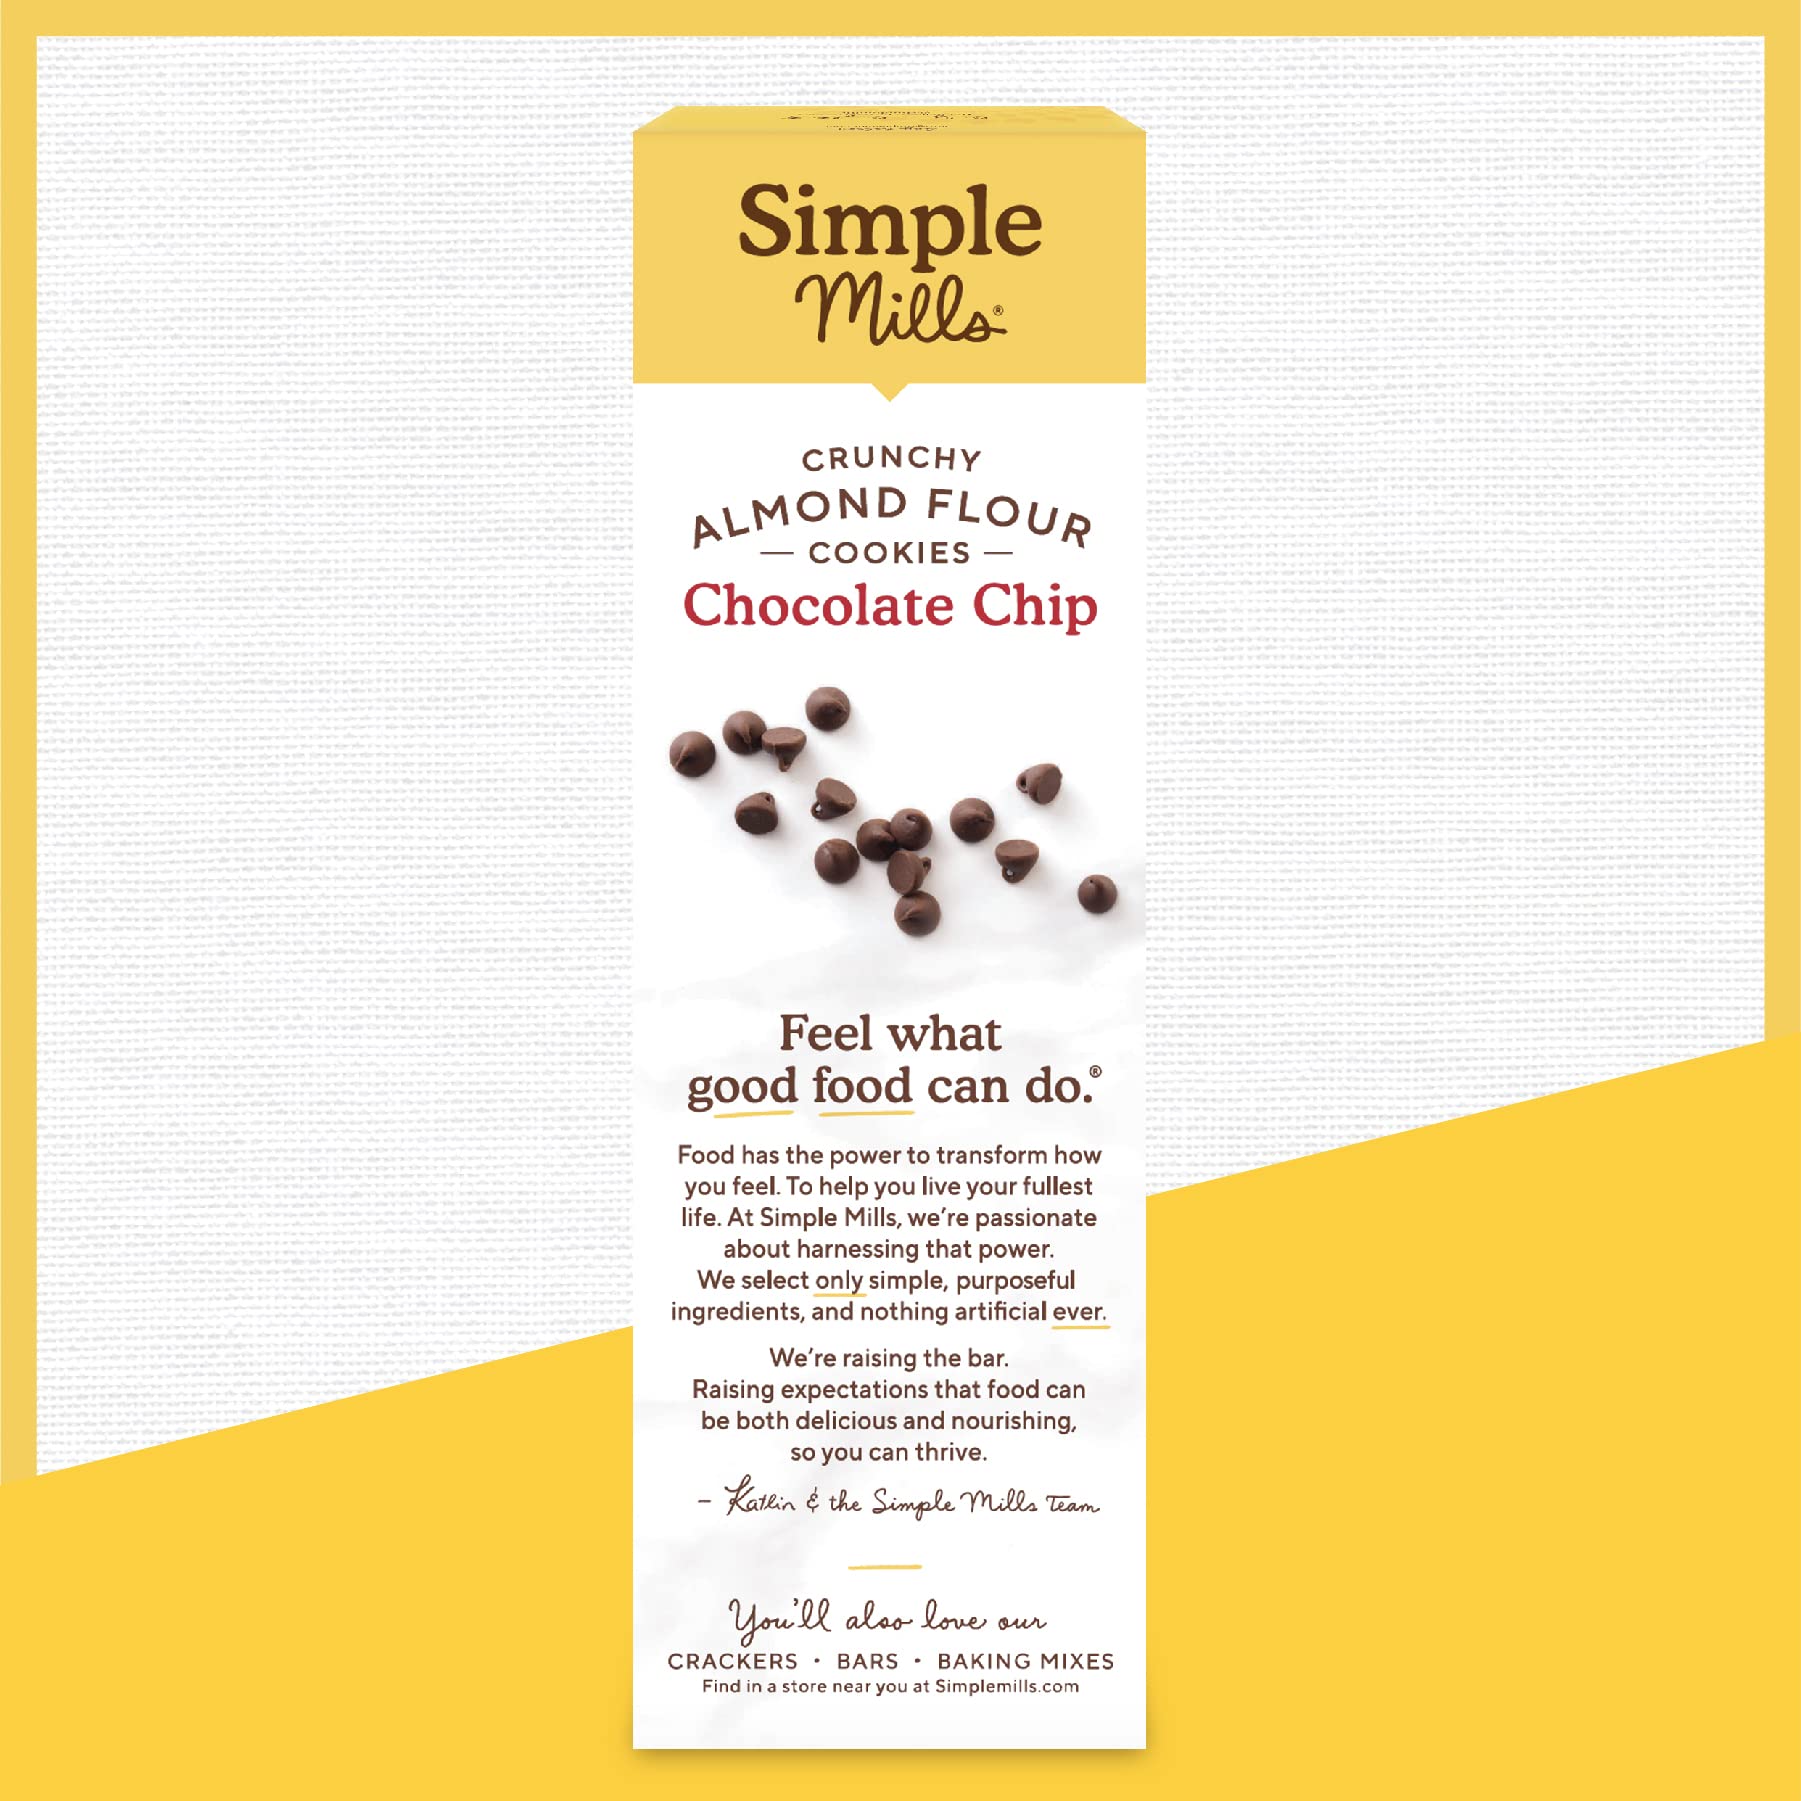 Simple Mills Almond Flour Crunchy Cookies, Chocolate Chip - Gluten Free, Vegan, Healthy Snacks, Made with Organic Coconut Oil, 5.5 Ounce (Pack of 1)